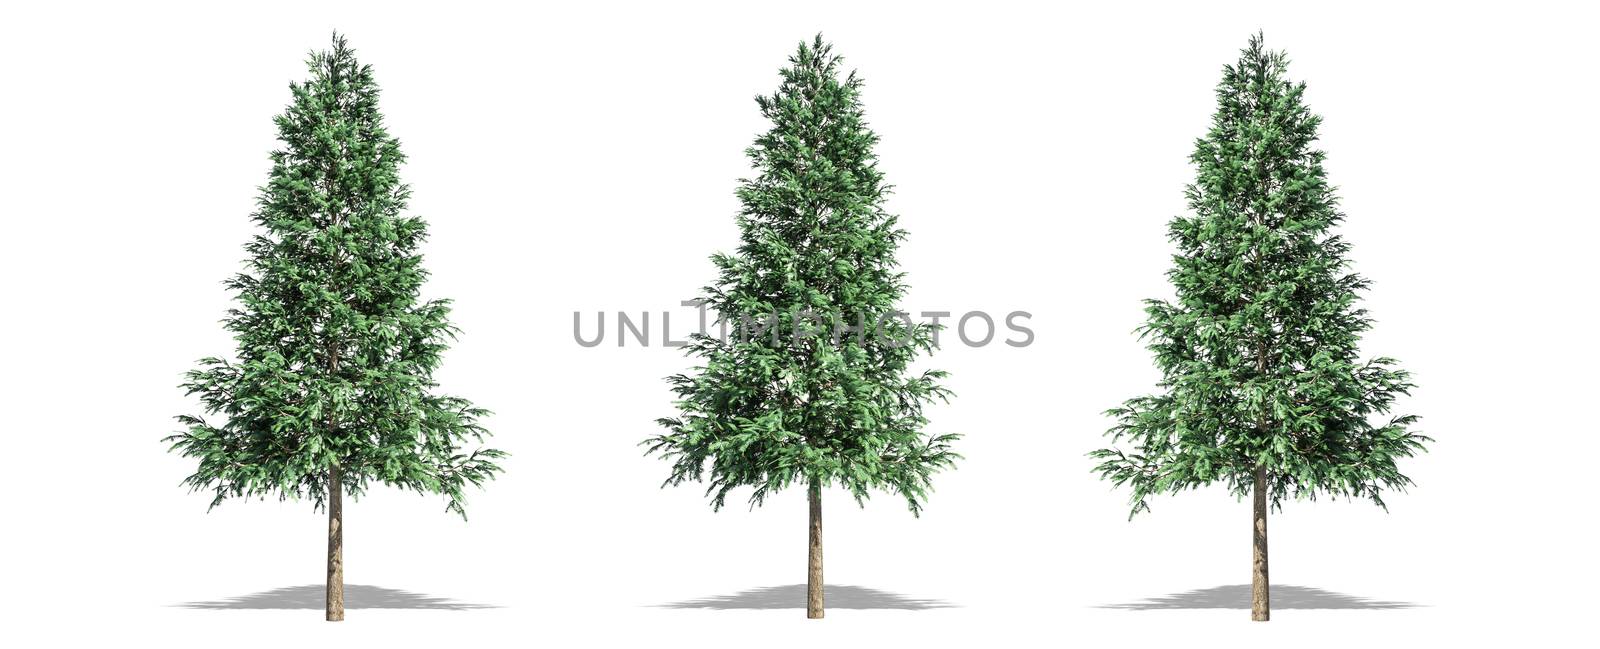 Beautiful Picea abies tree isolated and cutting on a white background with clipping path.